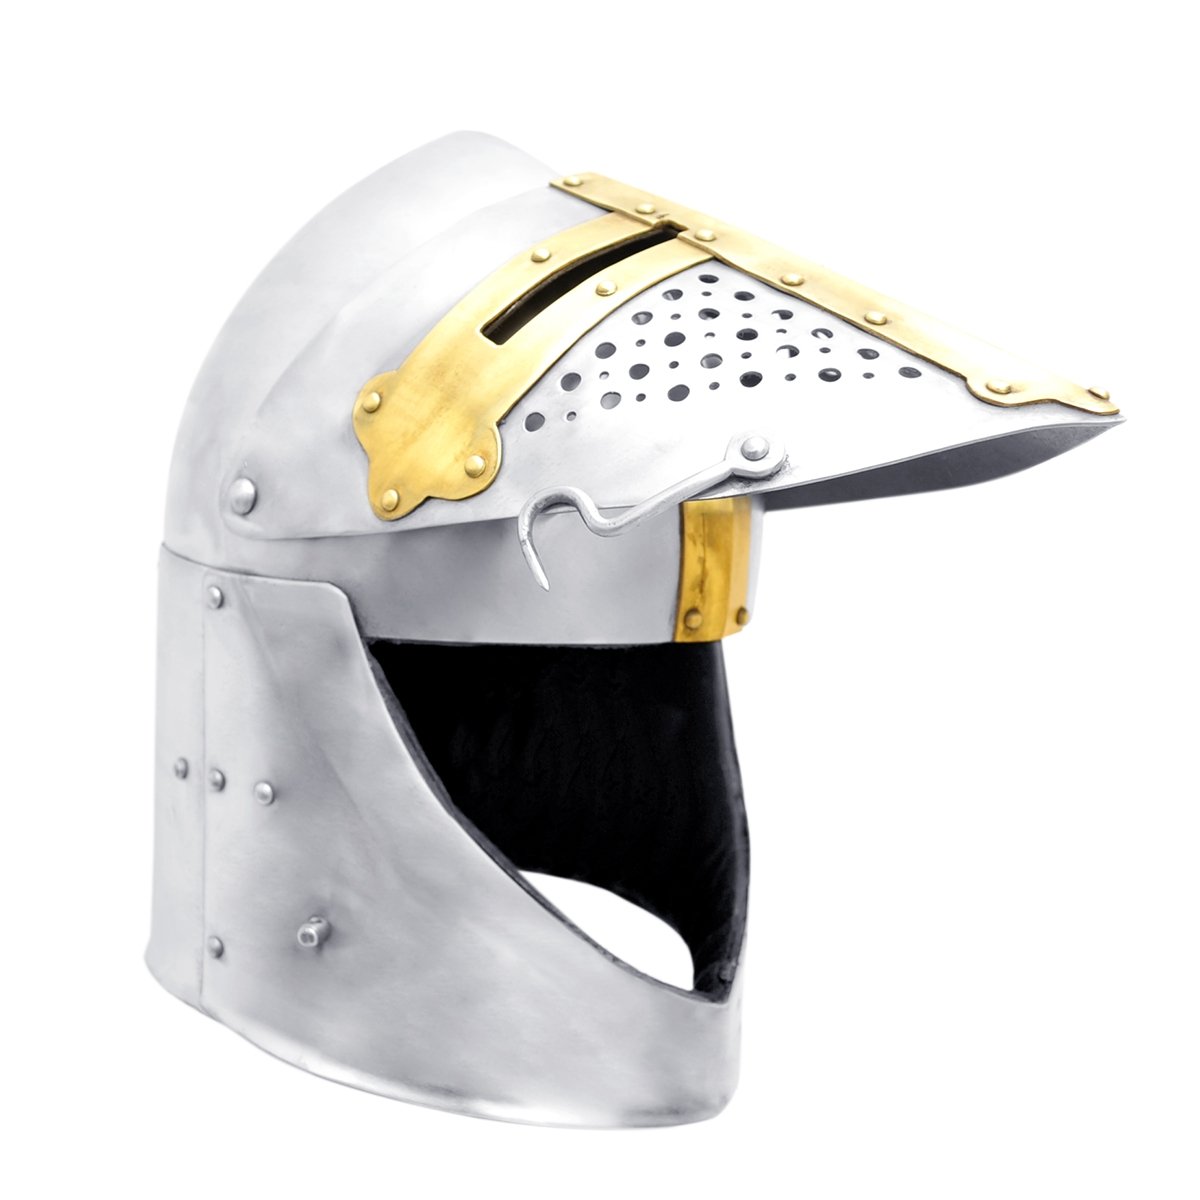 Sugar Loaf helmet with Movable visor and lock, Size XL